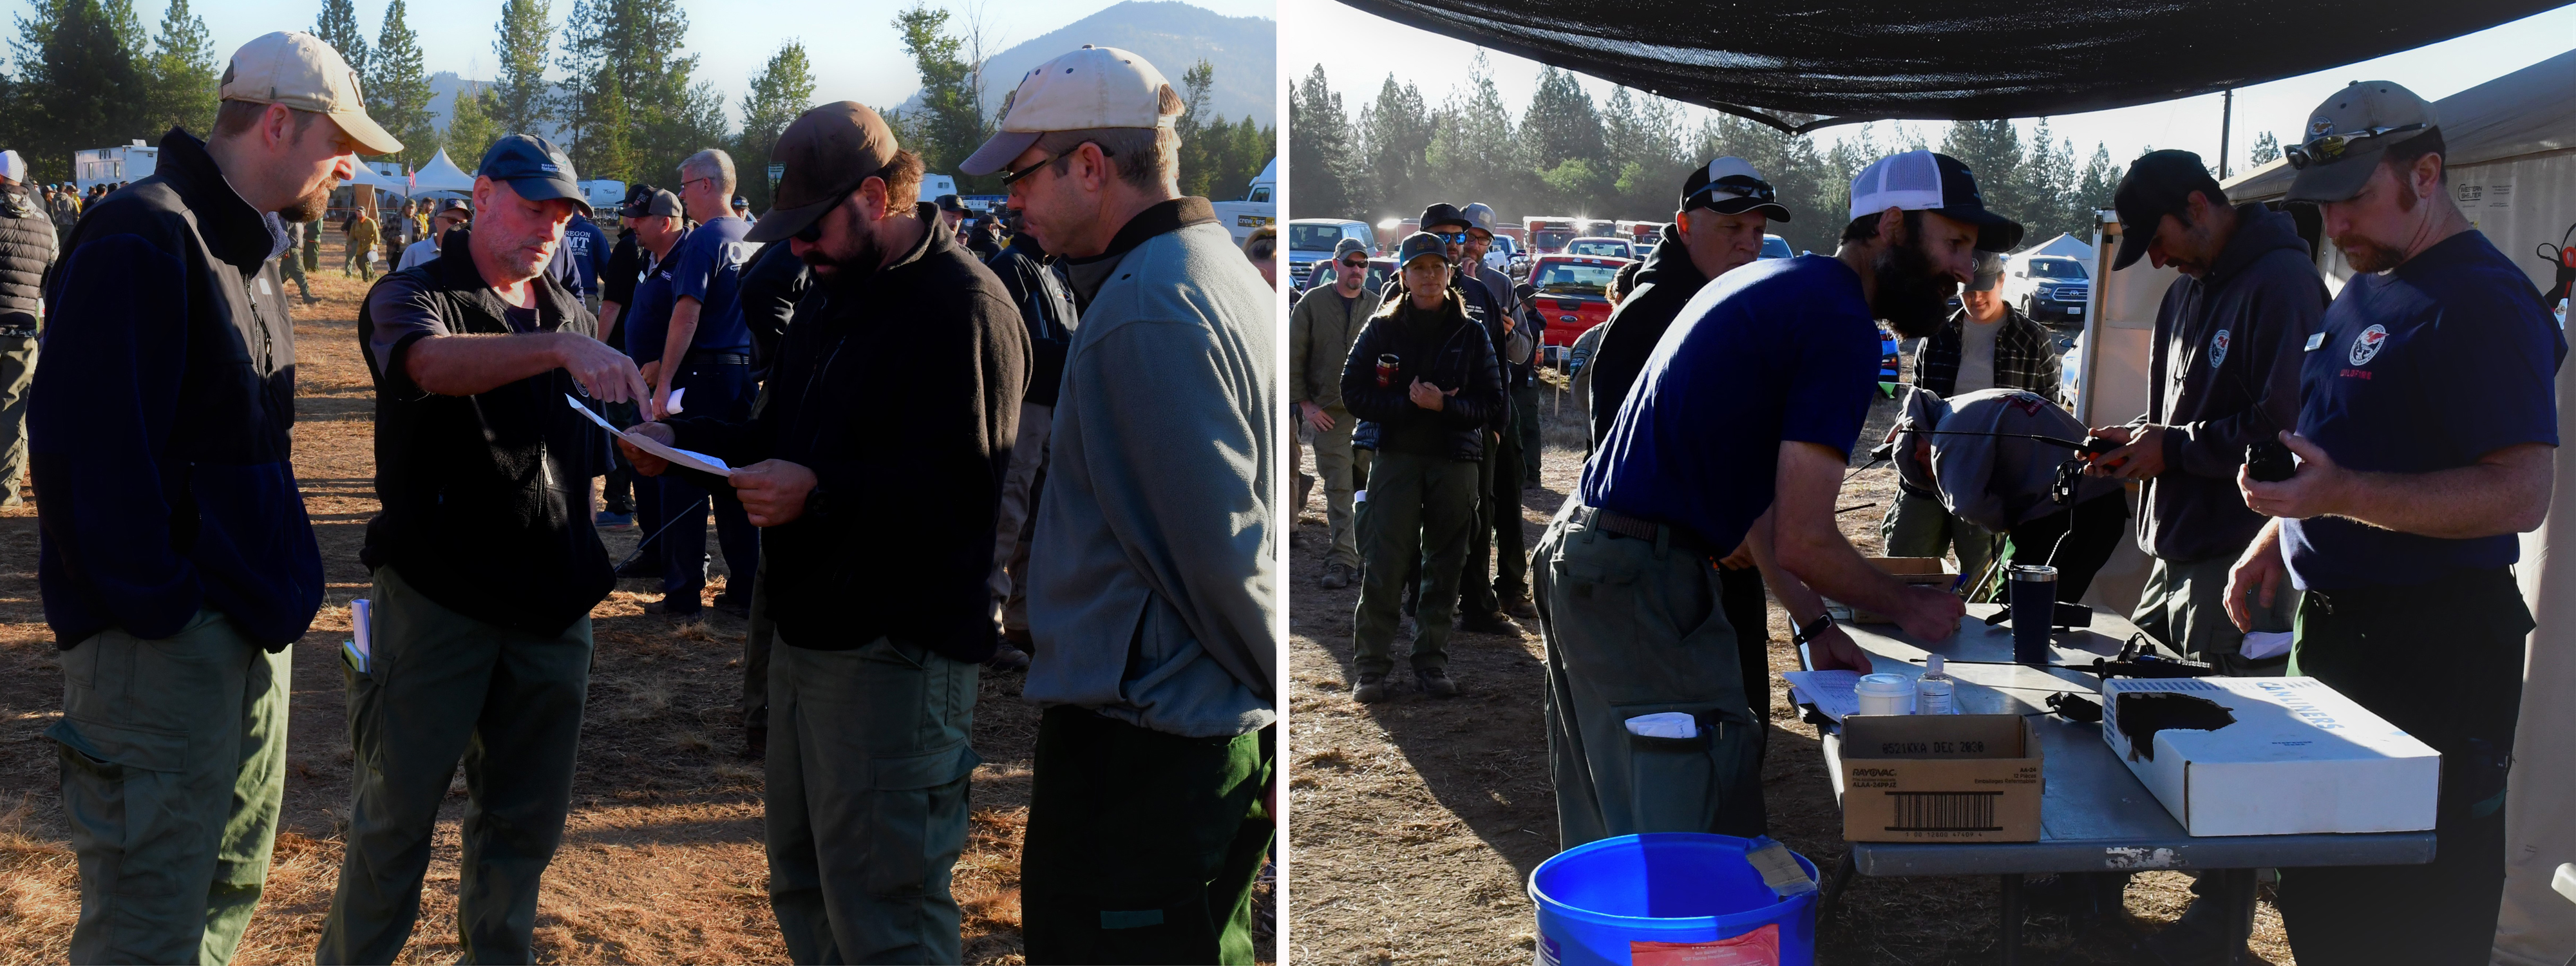 Left: briefing. Right: people wait in line for radios.